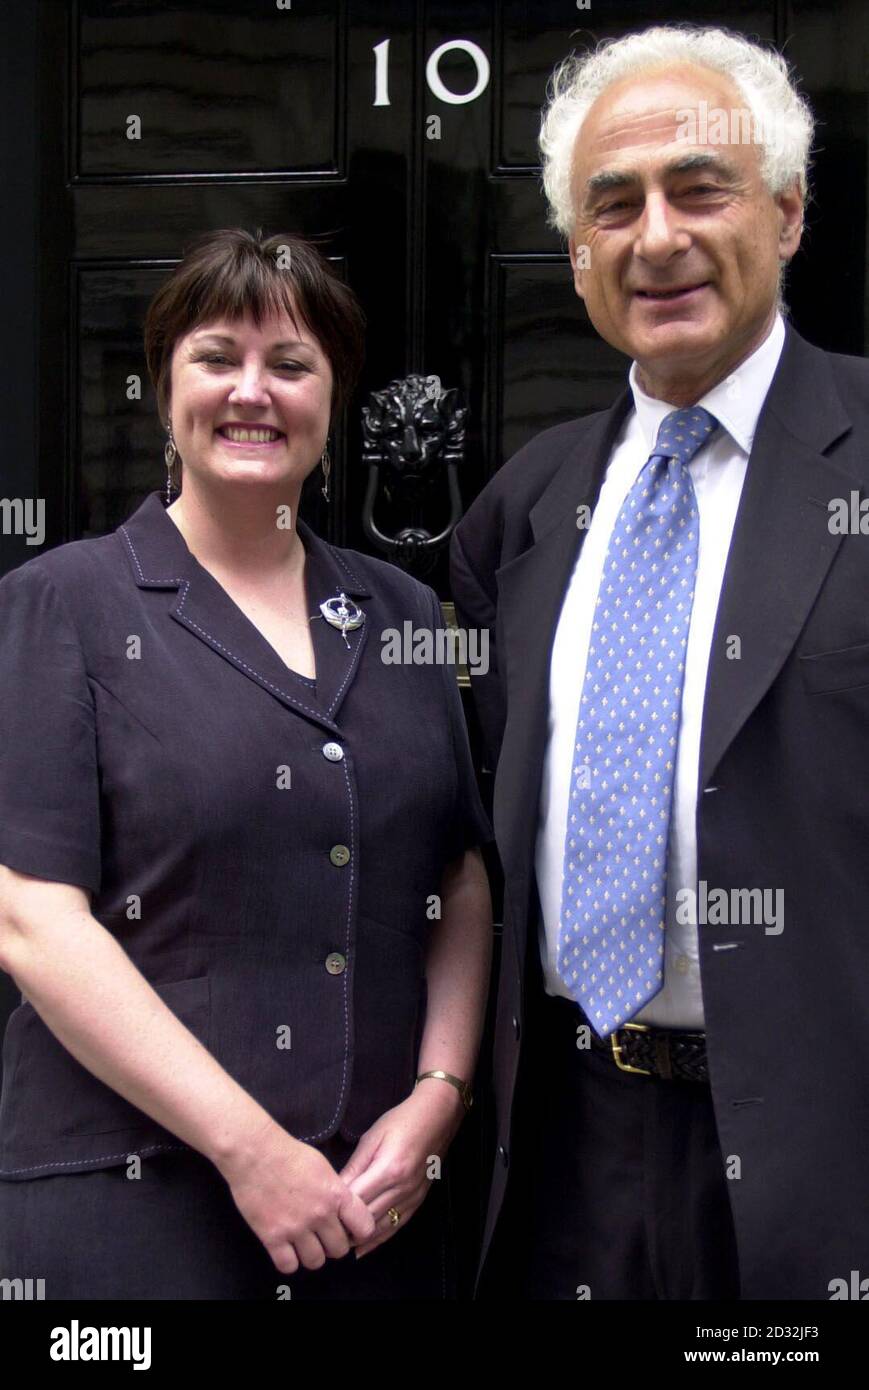 MP for Totnes in Devon, Anthony Steen stands with a head teacher from Devon outside No 10 Downing Street in central London. Mr Steen arrived with other local MP's from the Devon area as well as local head teachers and governors,  * ... as they gave in a petition to No 10 demanding to 'Stop Depriving Devon's Schools'. Stock Photo